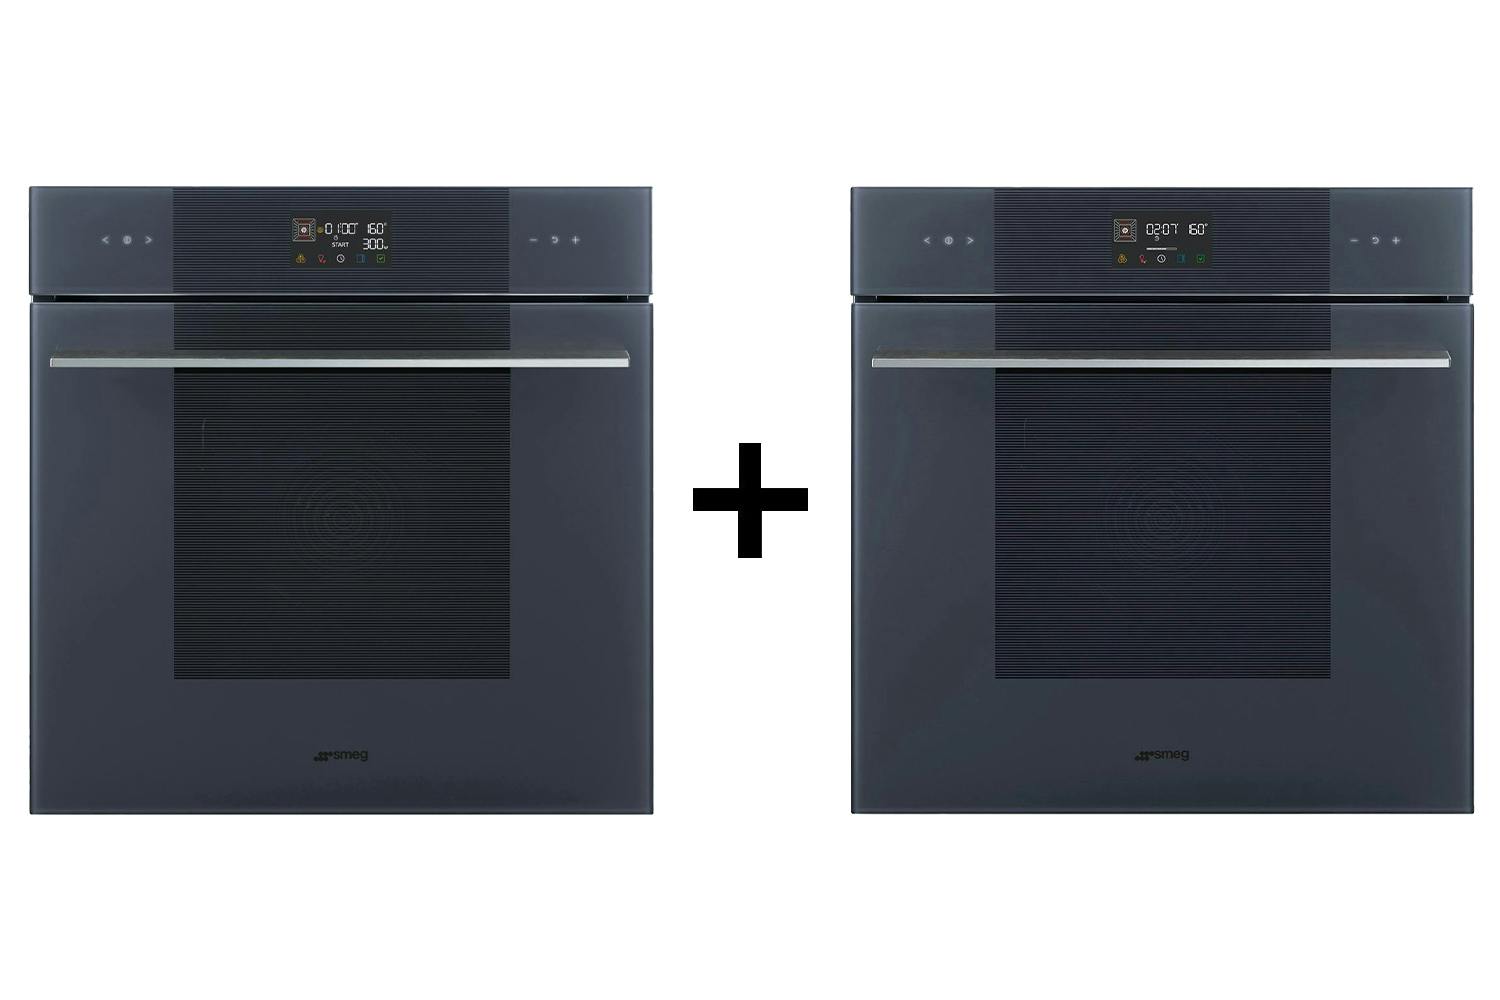 Smeg Built-in Combination Microwave Oven and 60cm Traditional Pyro Galileo Oven Bundle